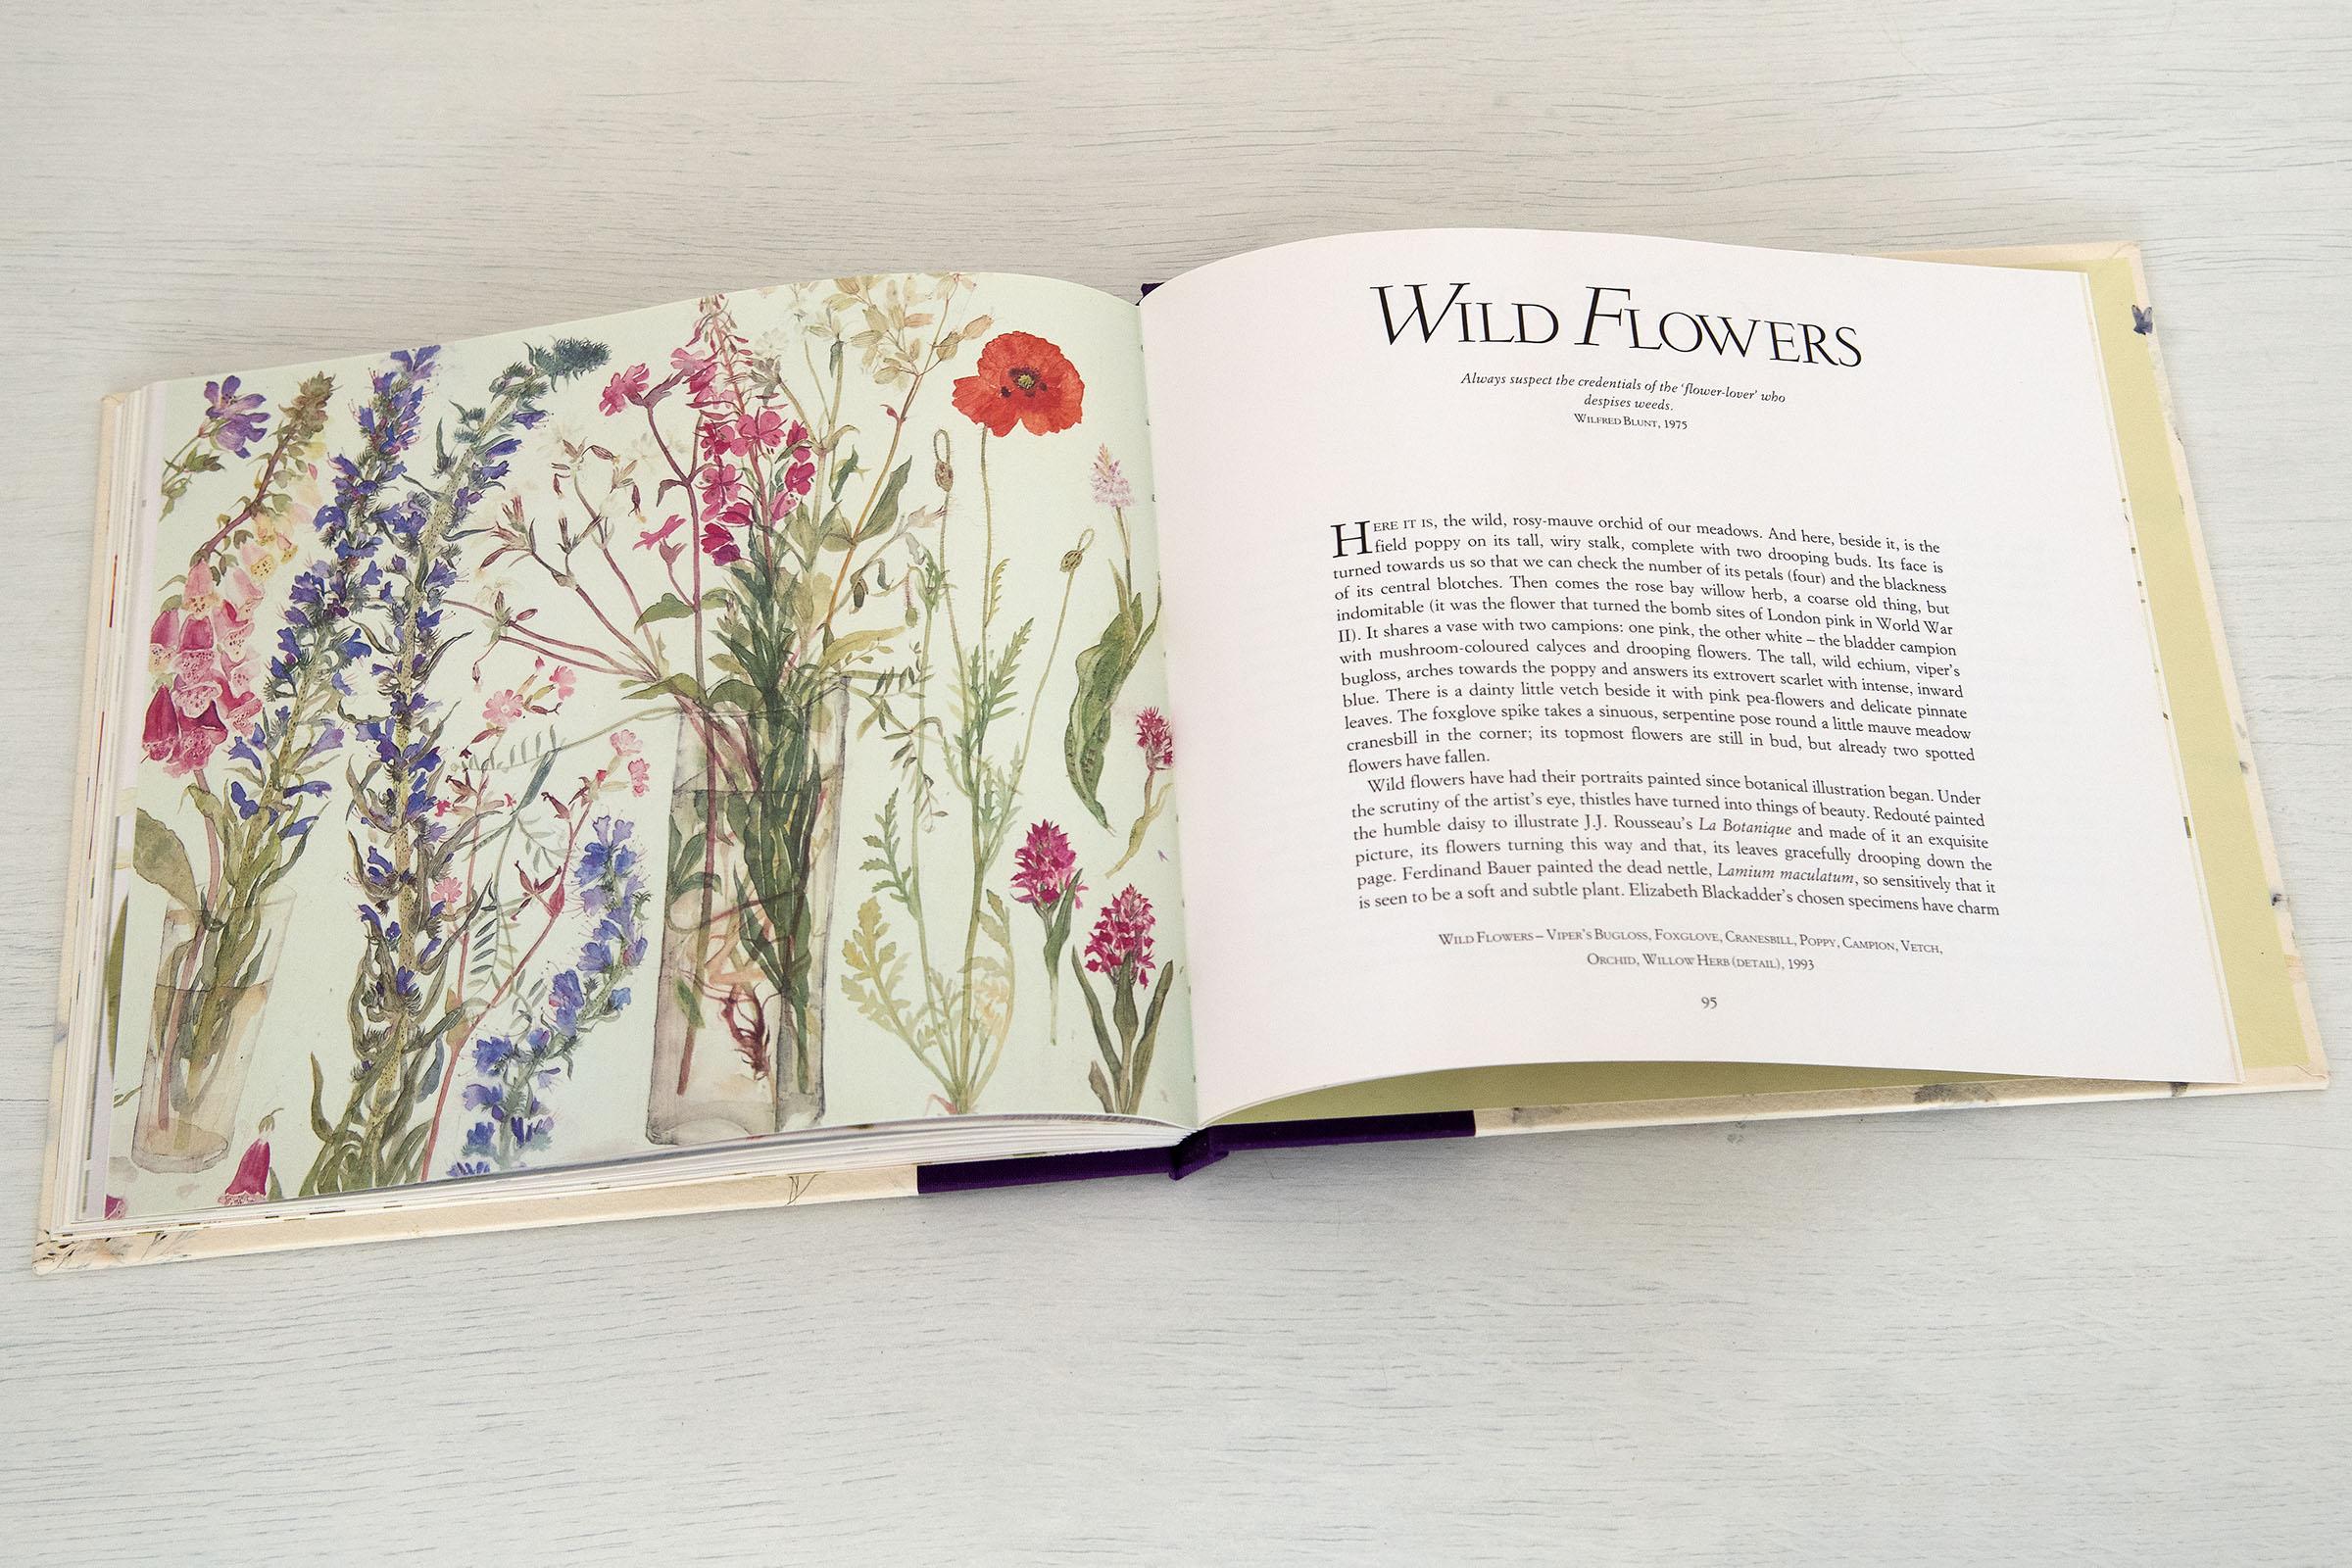 'Favourite Flowers' Limited edition book with signed aquatint 'Iris' - Contemporary Print by Elizabeth Blackadder